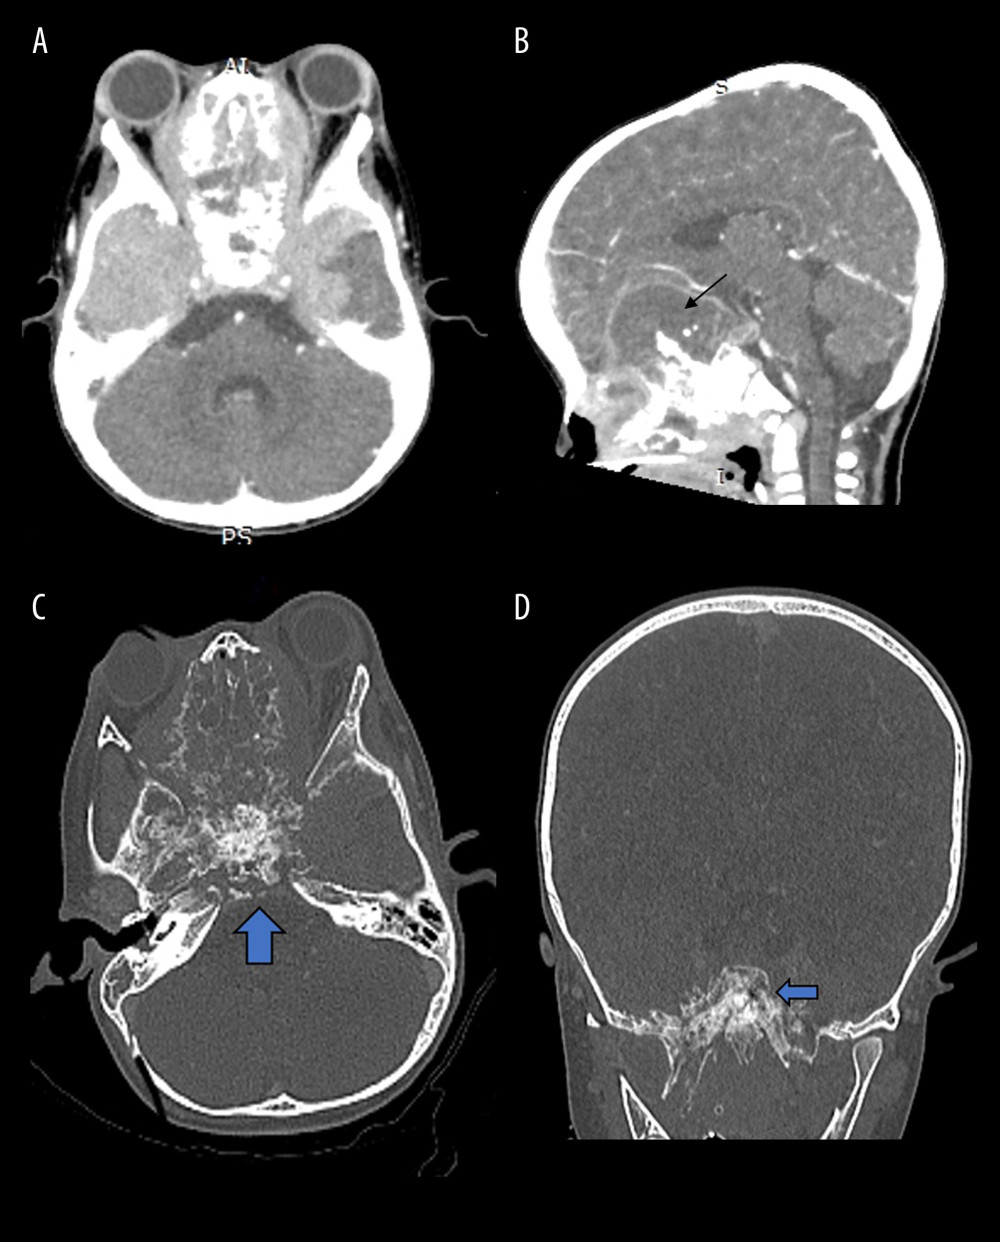 Post-contrast computed tomography (CT) scan of the brain in the (A) axial and (B) sagittal view showing infiltrative mass with a mixed solid and cystic appearance (black arrow) at the base of the skull, causing extensive local infiltration. Post-contrast CT scan of the brain in the bone setting in (C) axial and (D) coronal view showing mixed bone sclerosis and erosion in the skull base of the anterior and middle cranial fossa (blue block arrows).